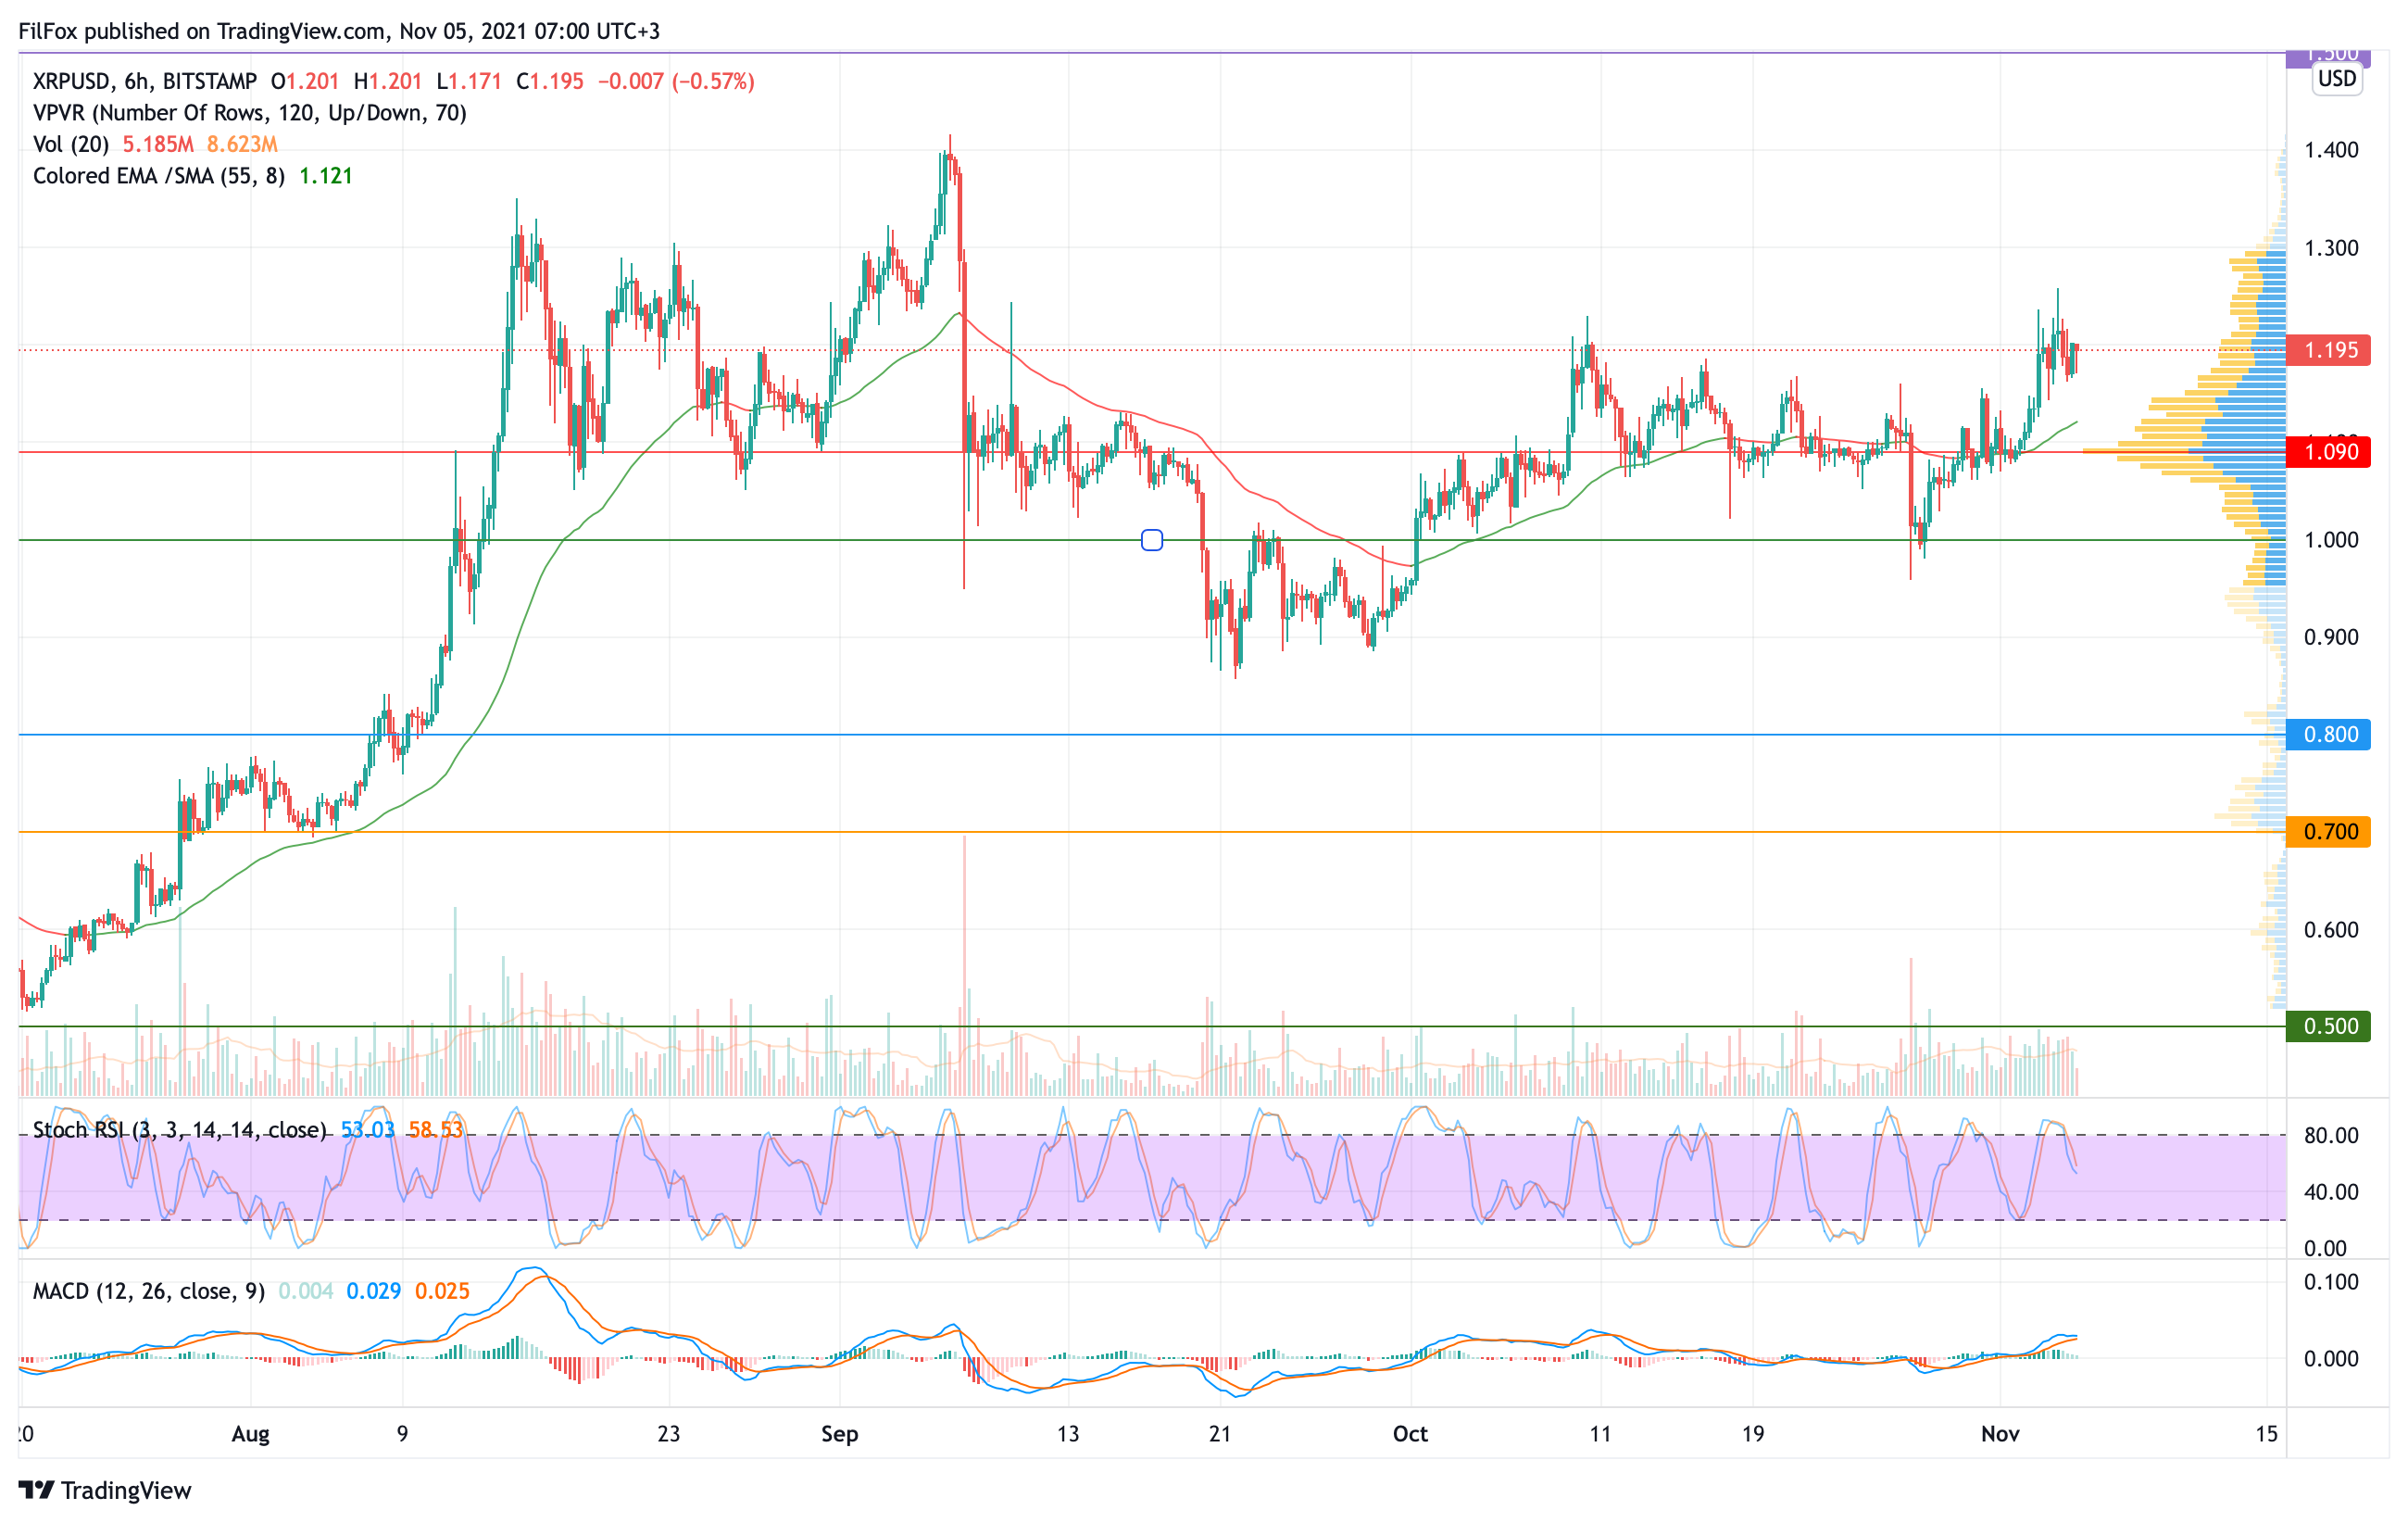 Analysis of prices for Bitcoin, Ethereum, XRP for 11/05/2021